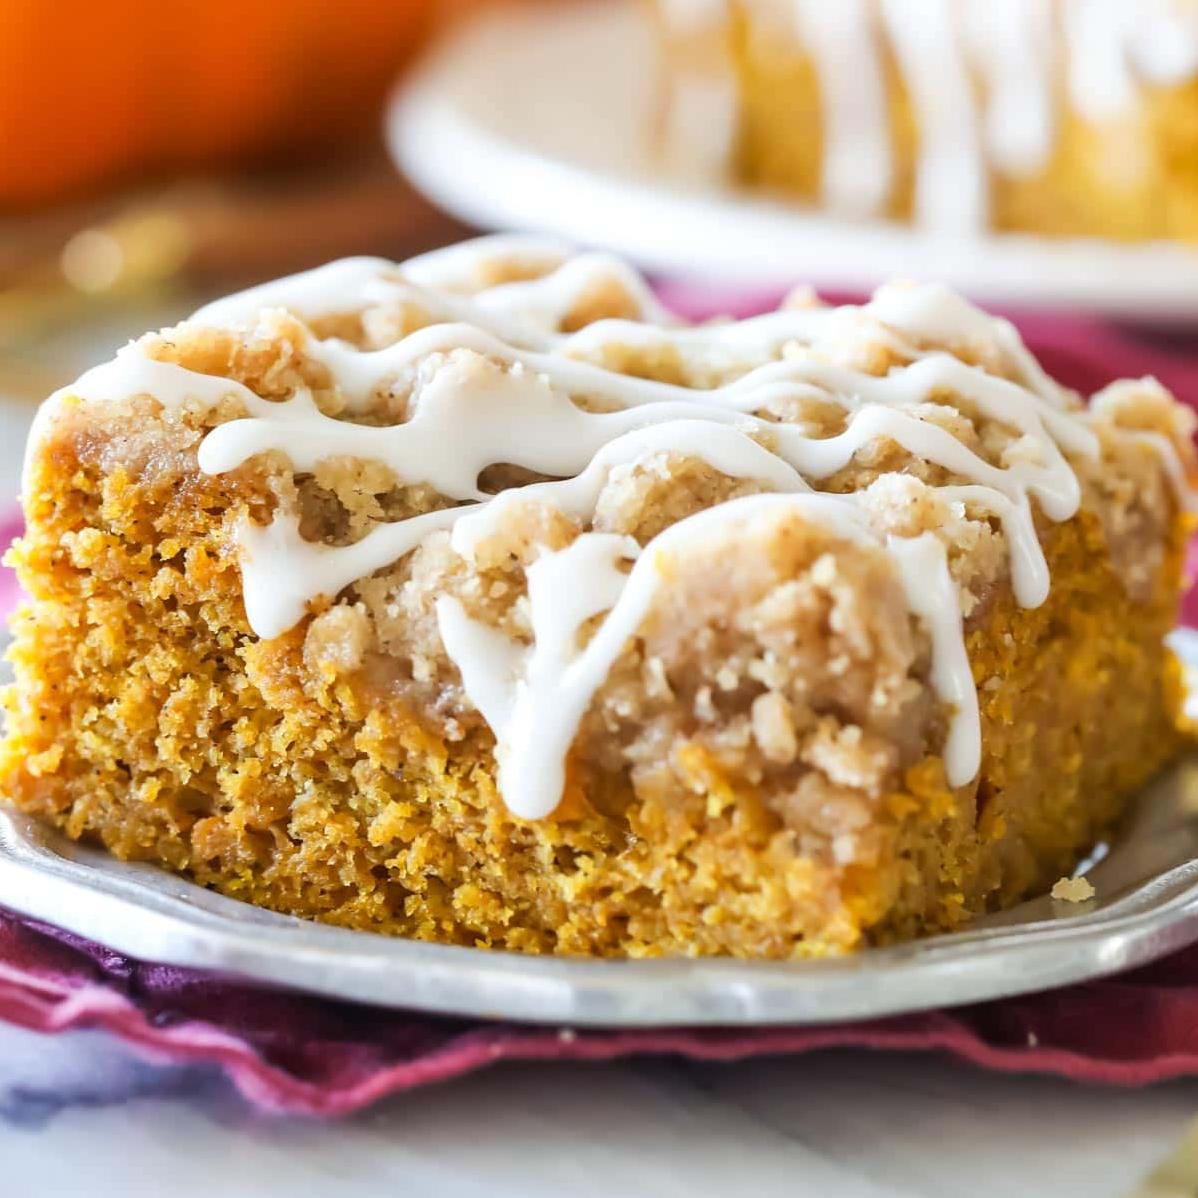  Is it fall yet? This pumpkin coffee cake will have you feeling the cozy autumn vibes in no time.